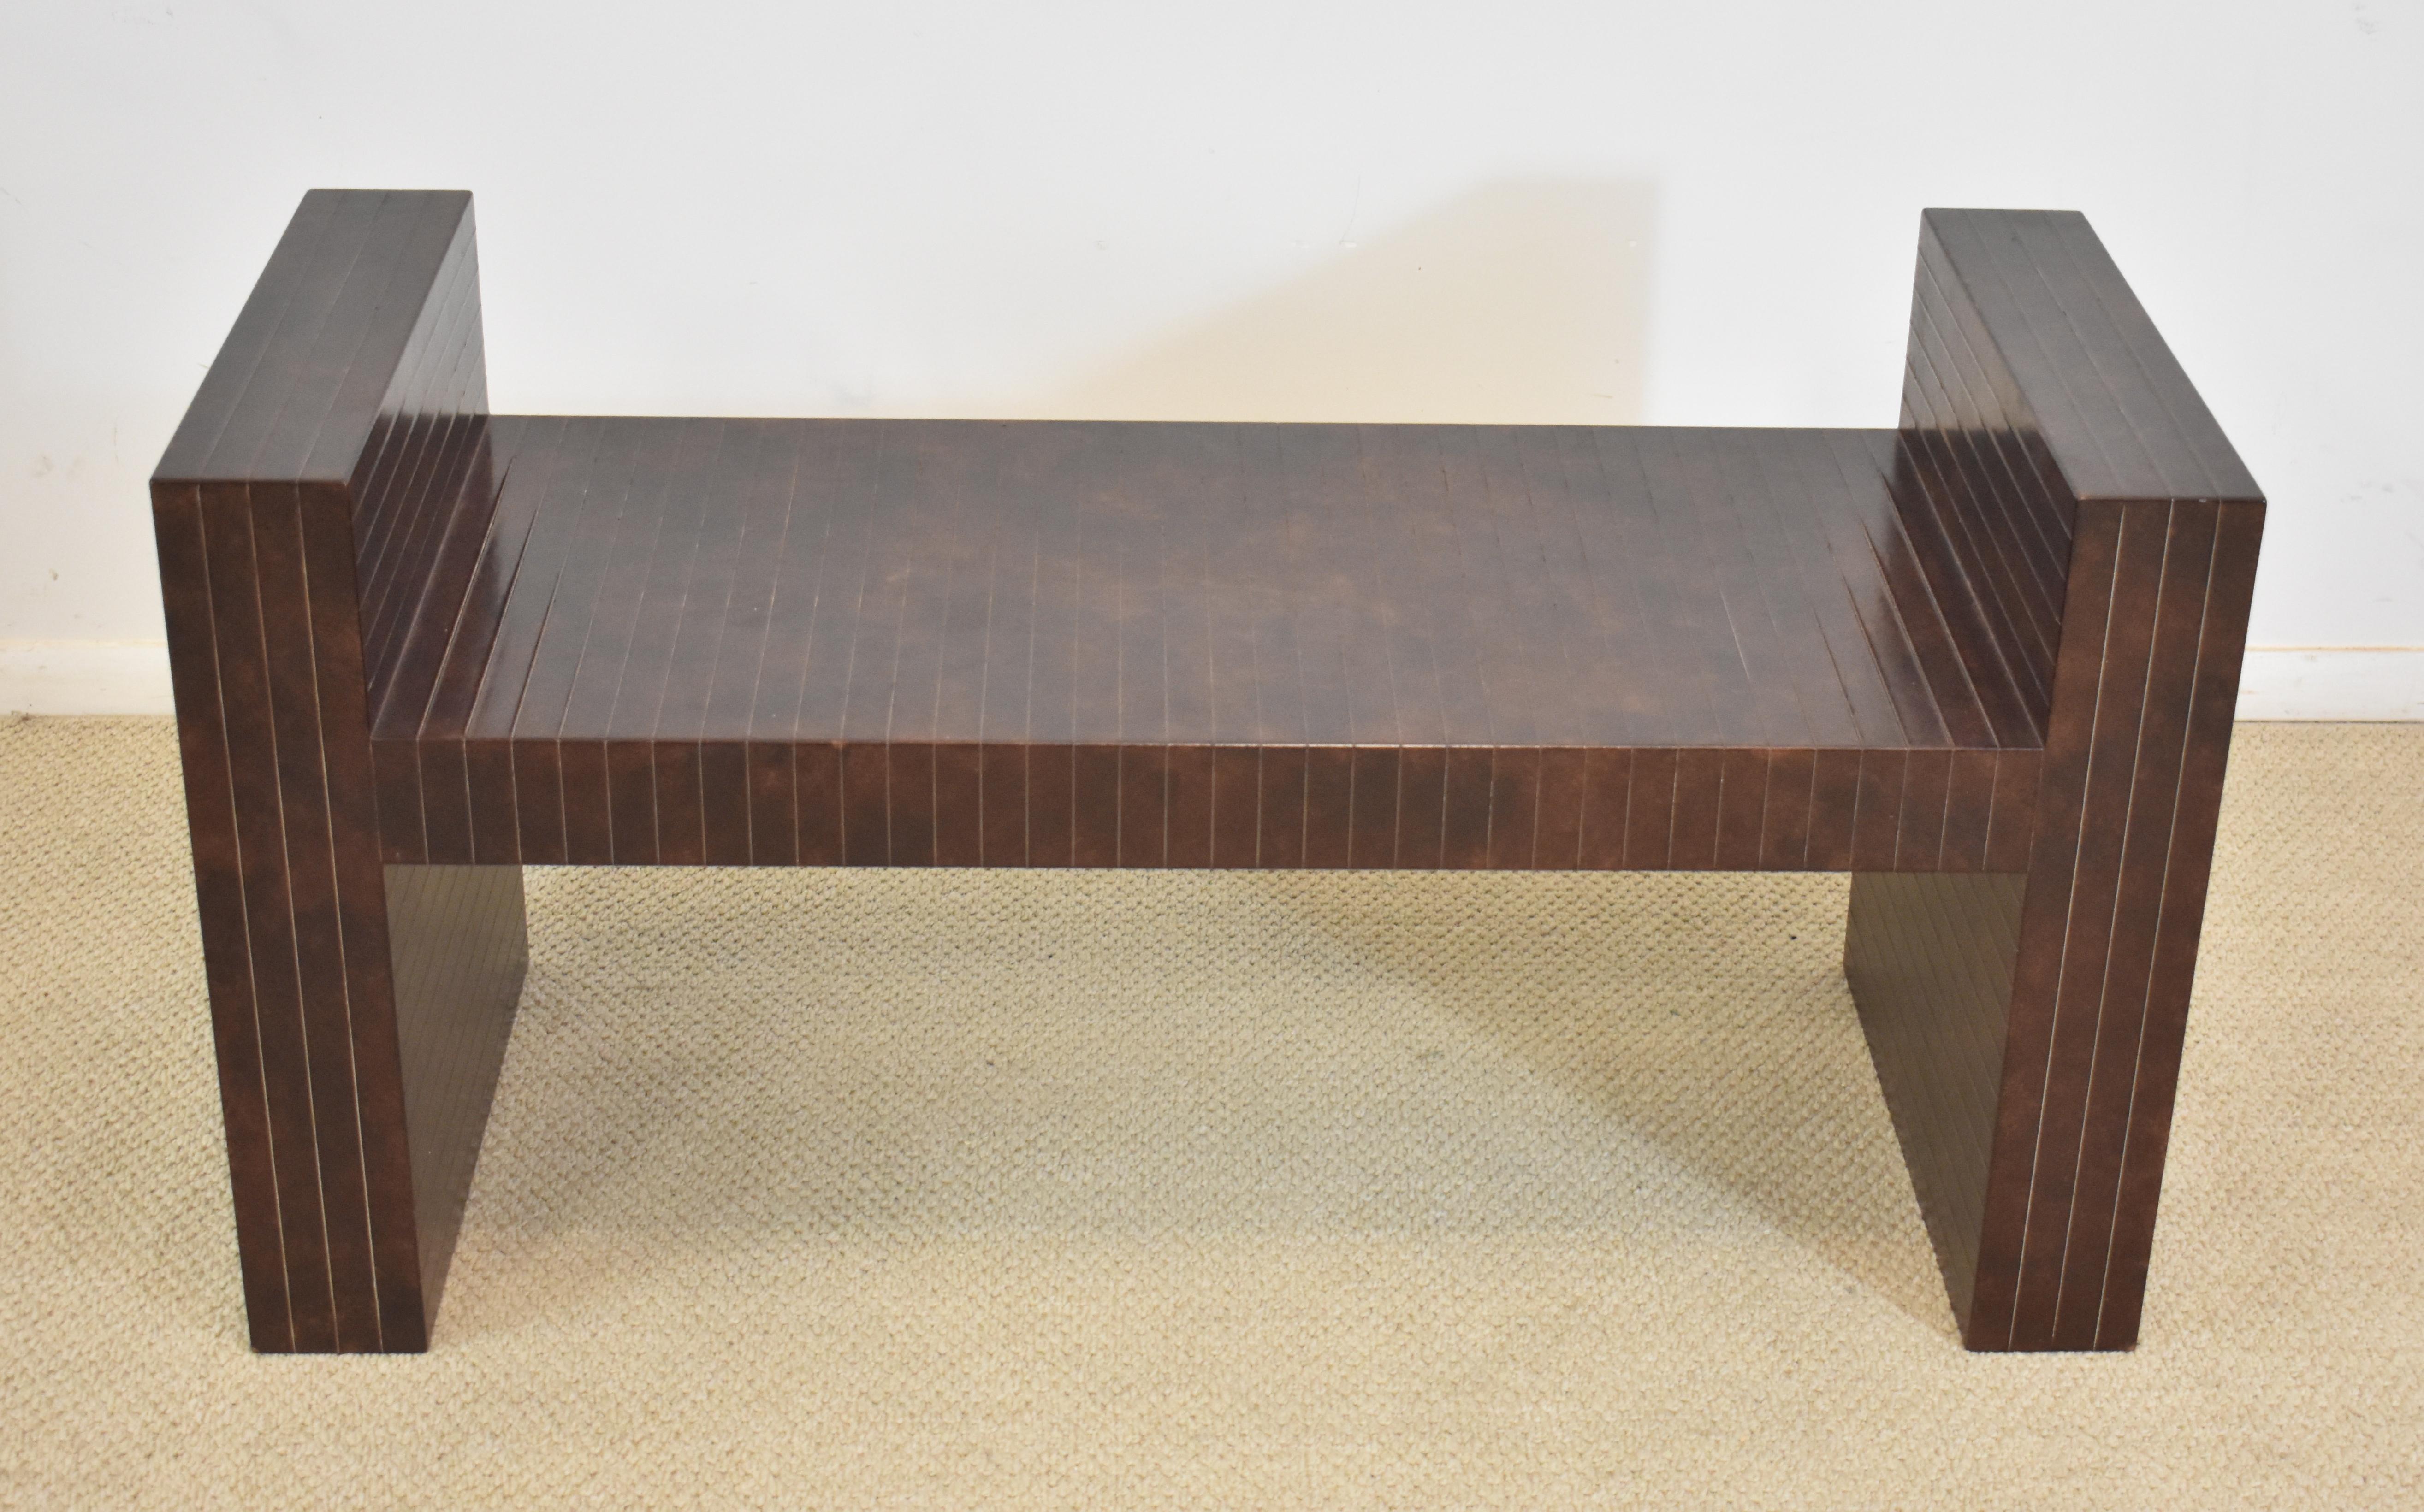 Mid-Century Modern sculptural bench clad in brown scored leather by Karl Springer. Very good condition. Dimensions: 18